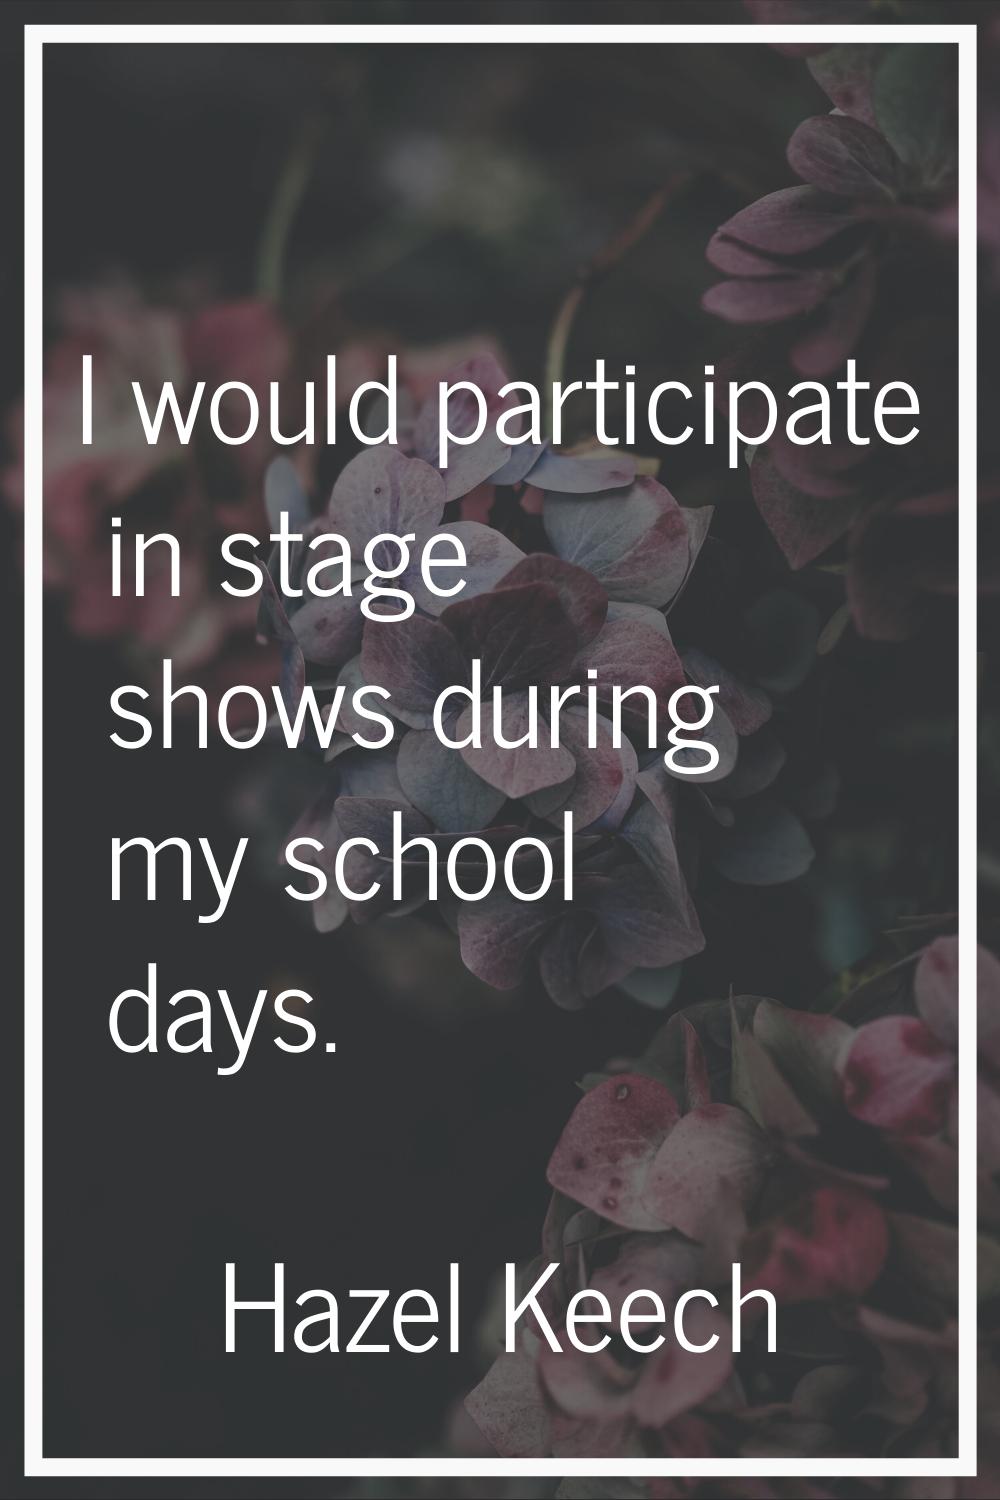 I would participate in stage shows during my school days.